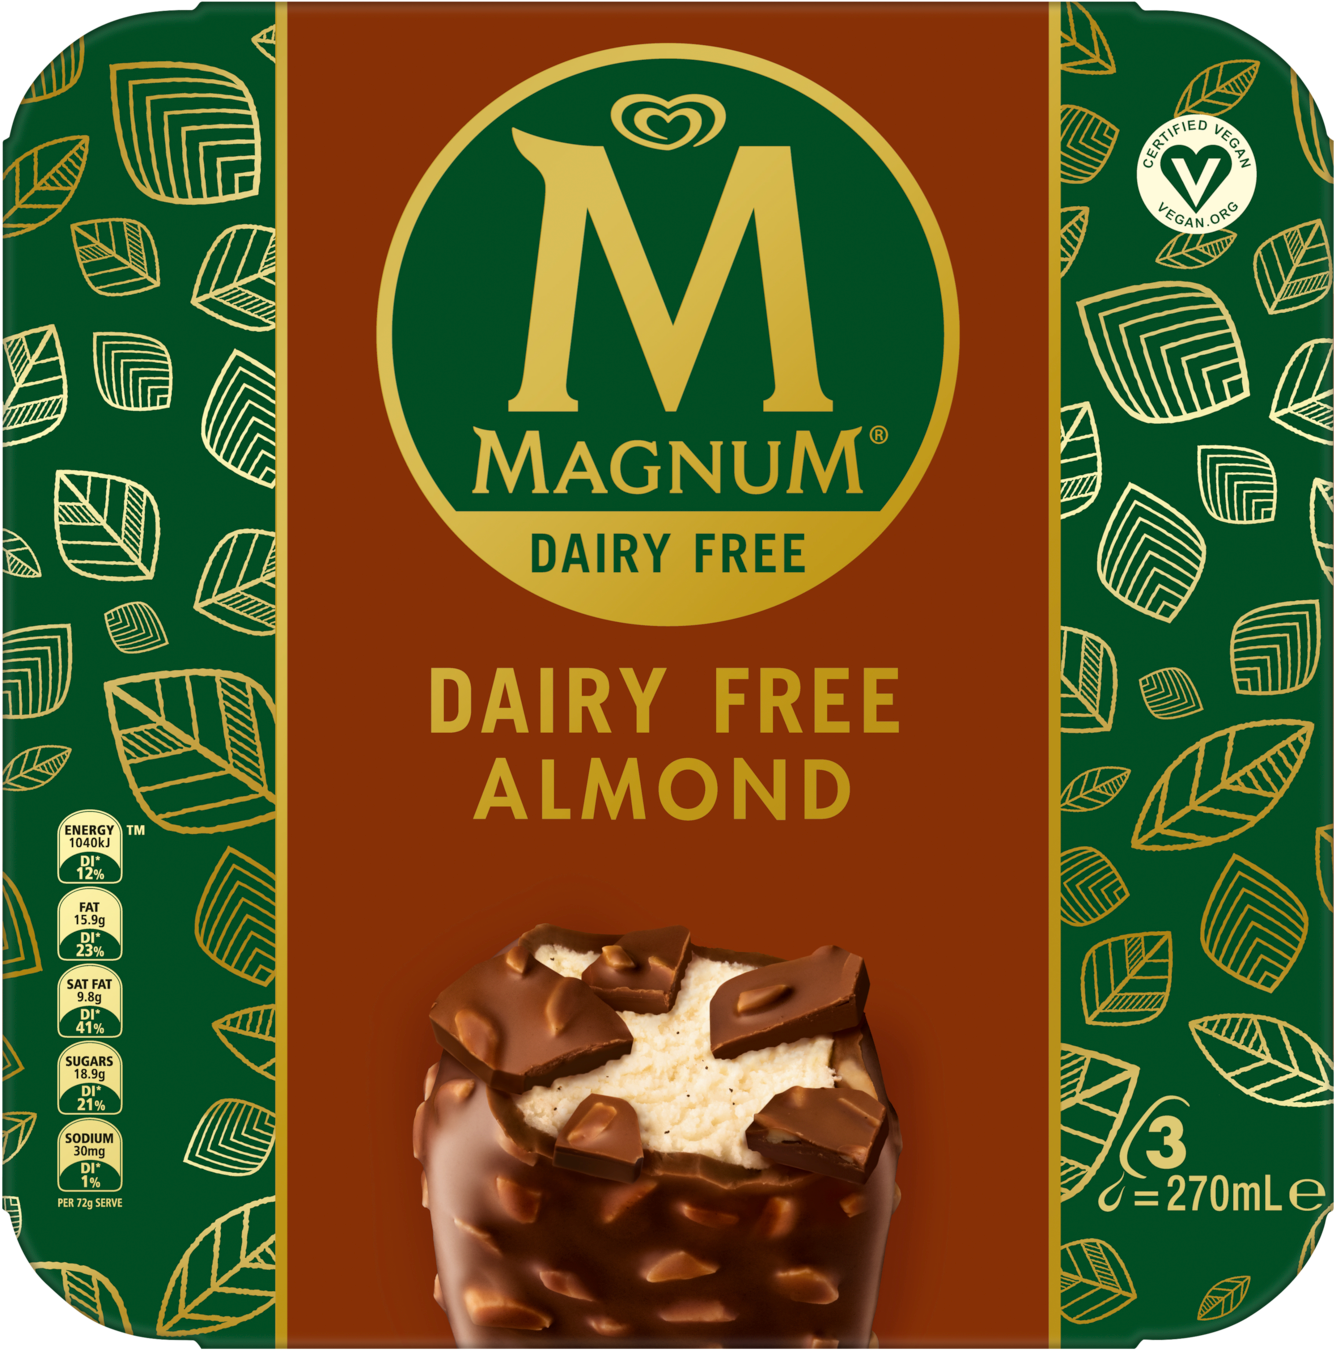 Magnum Dairy Free Almond Ice Cream Packaging PNG